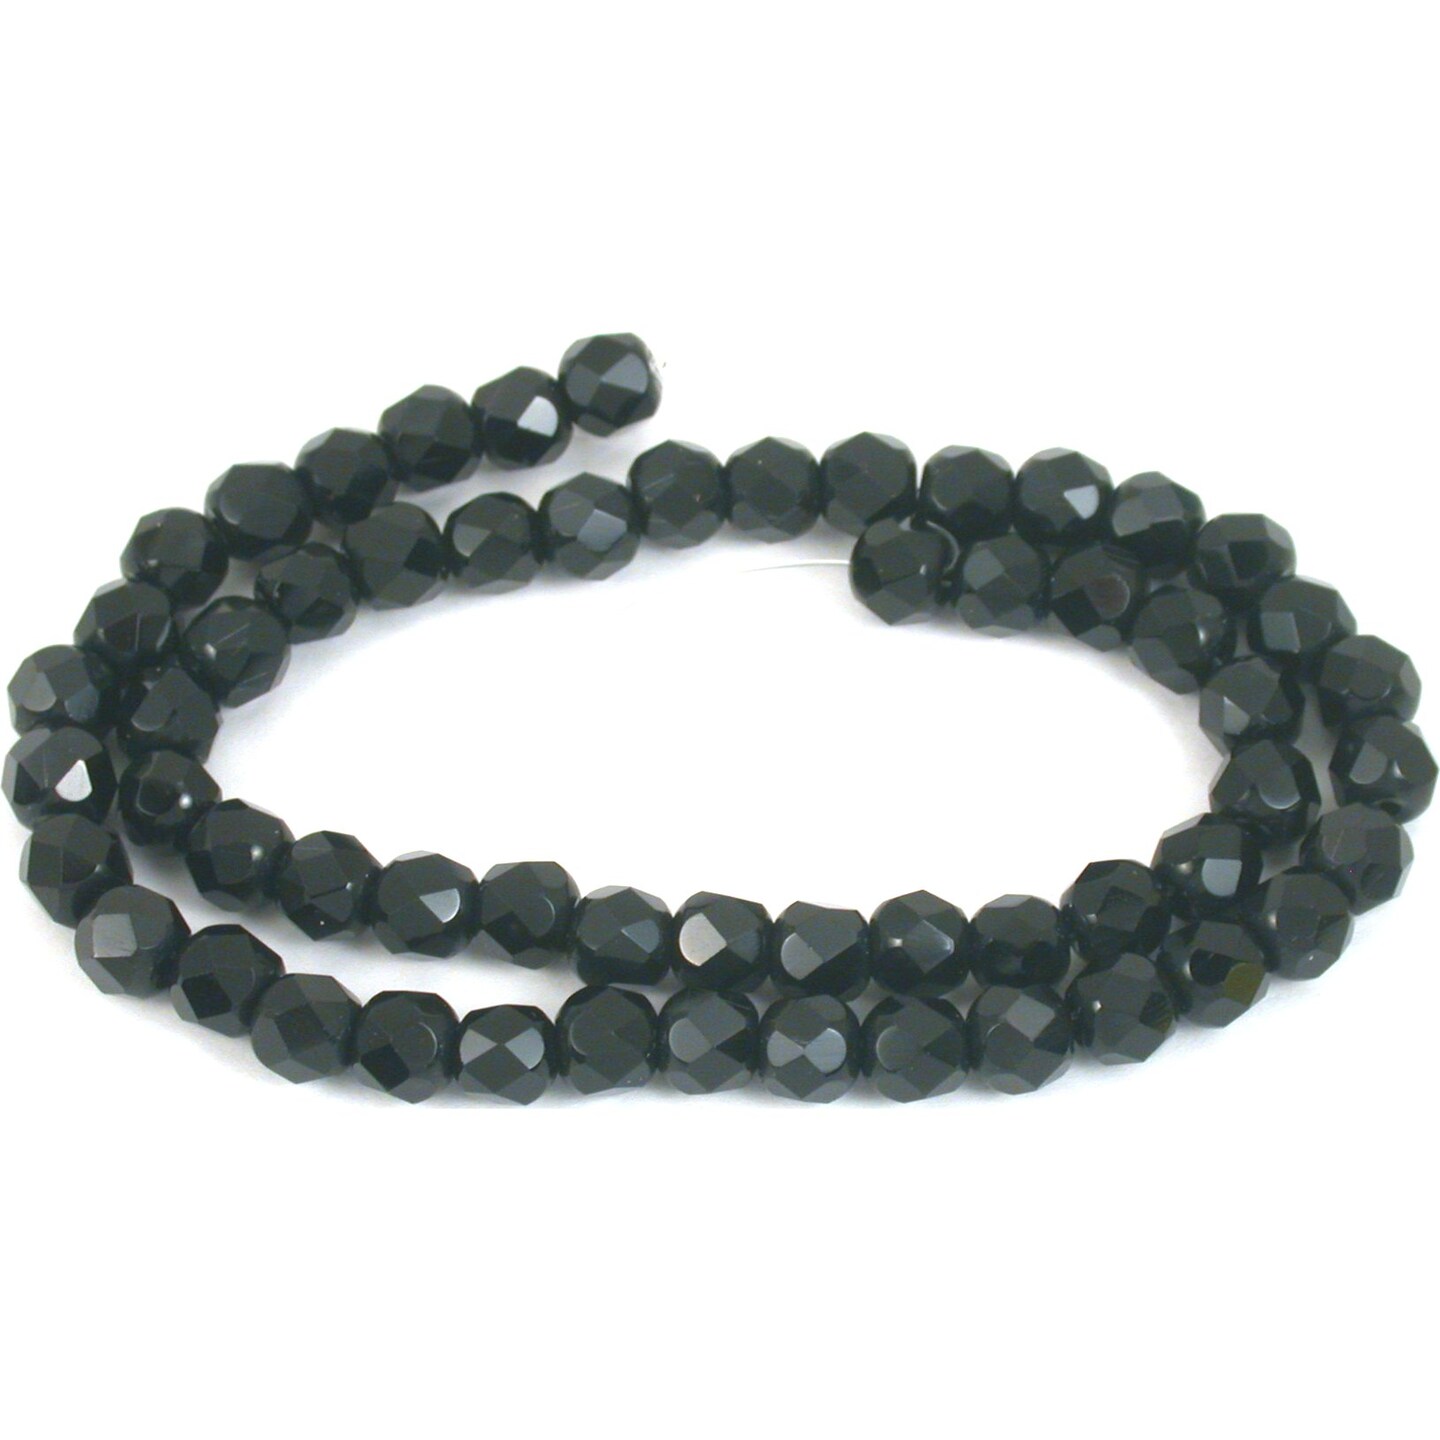 Round Faceted Fire Polished Chinese Crystal Beads Black 6mm 1 Strand